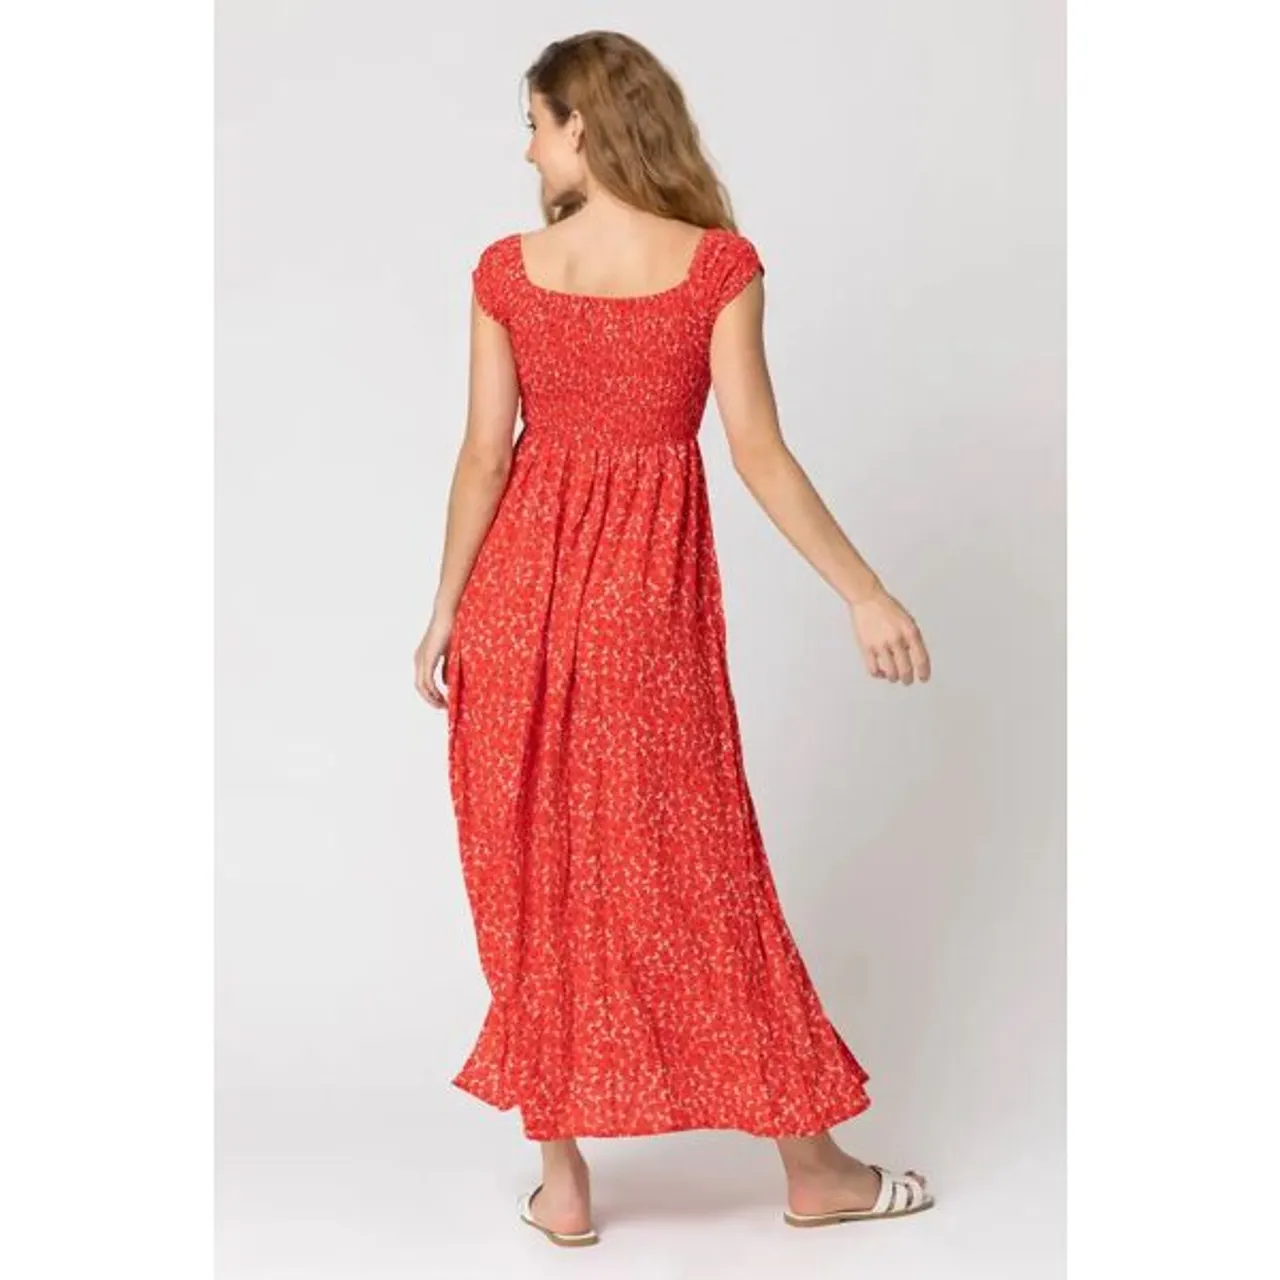 Roman Shirred Ditsy Floral Print Bardot Dress in Red - Size 10 10 female